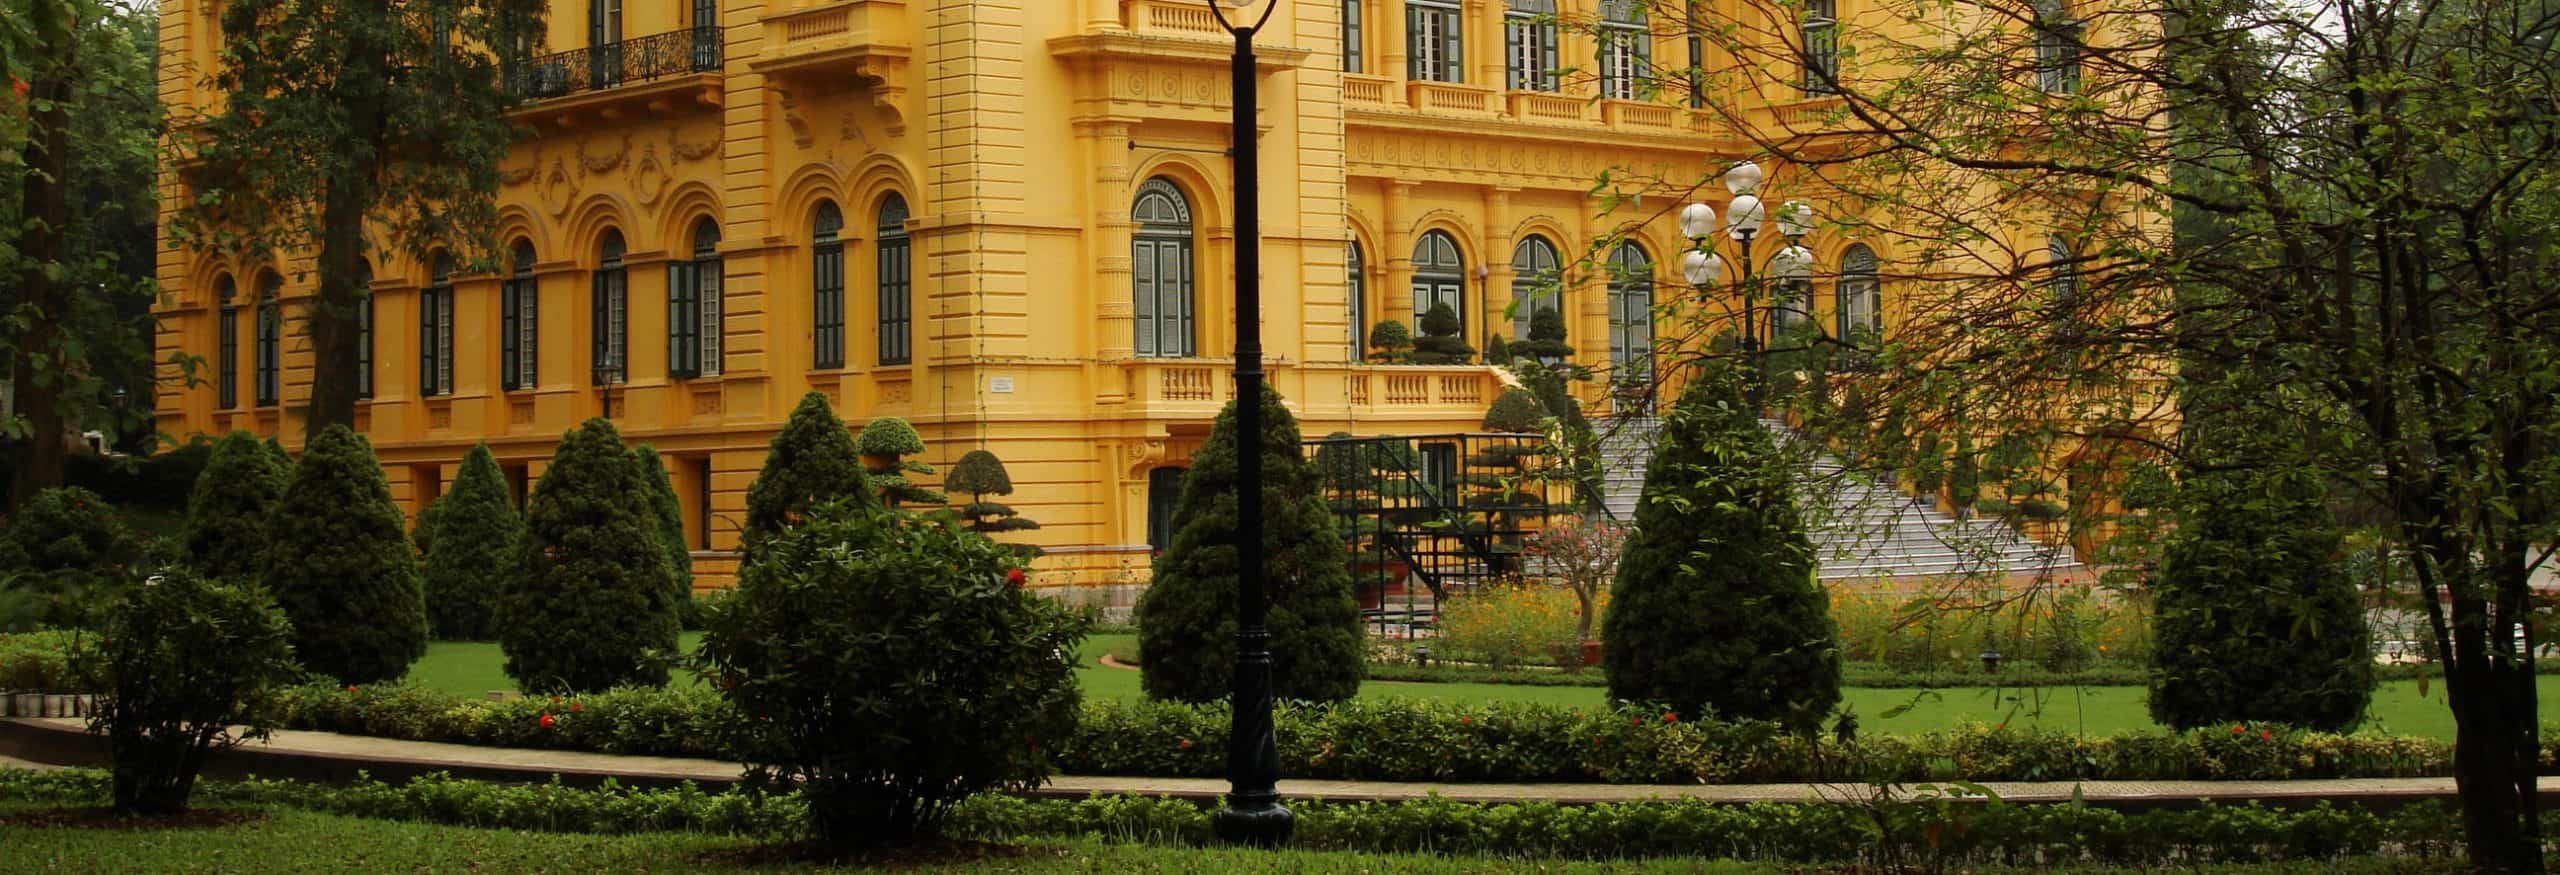 Presidential Palace in Hanoi: Legacy of Vietnam History & Culture